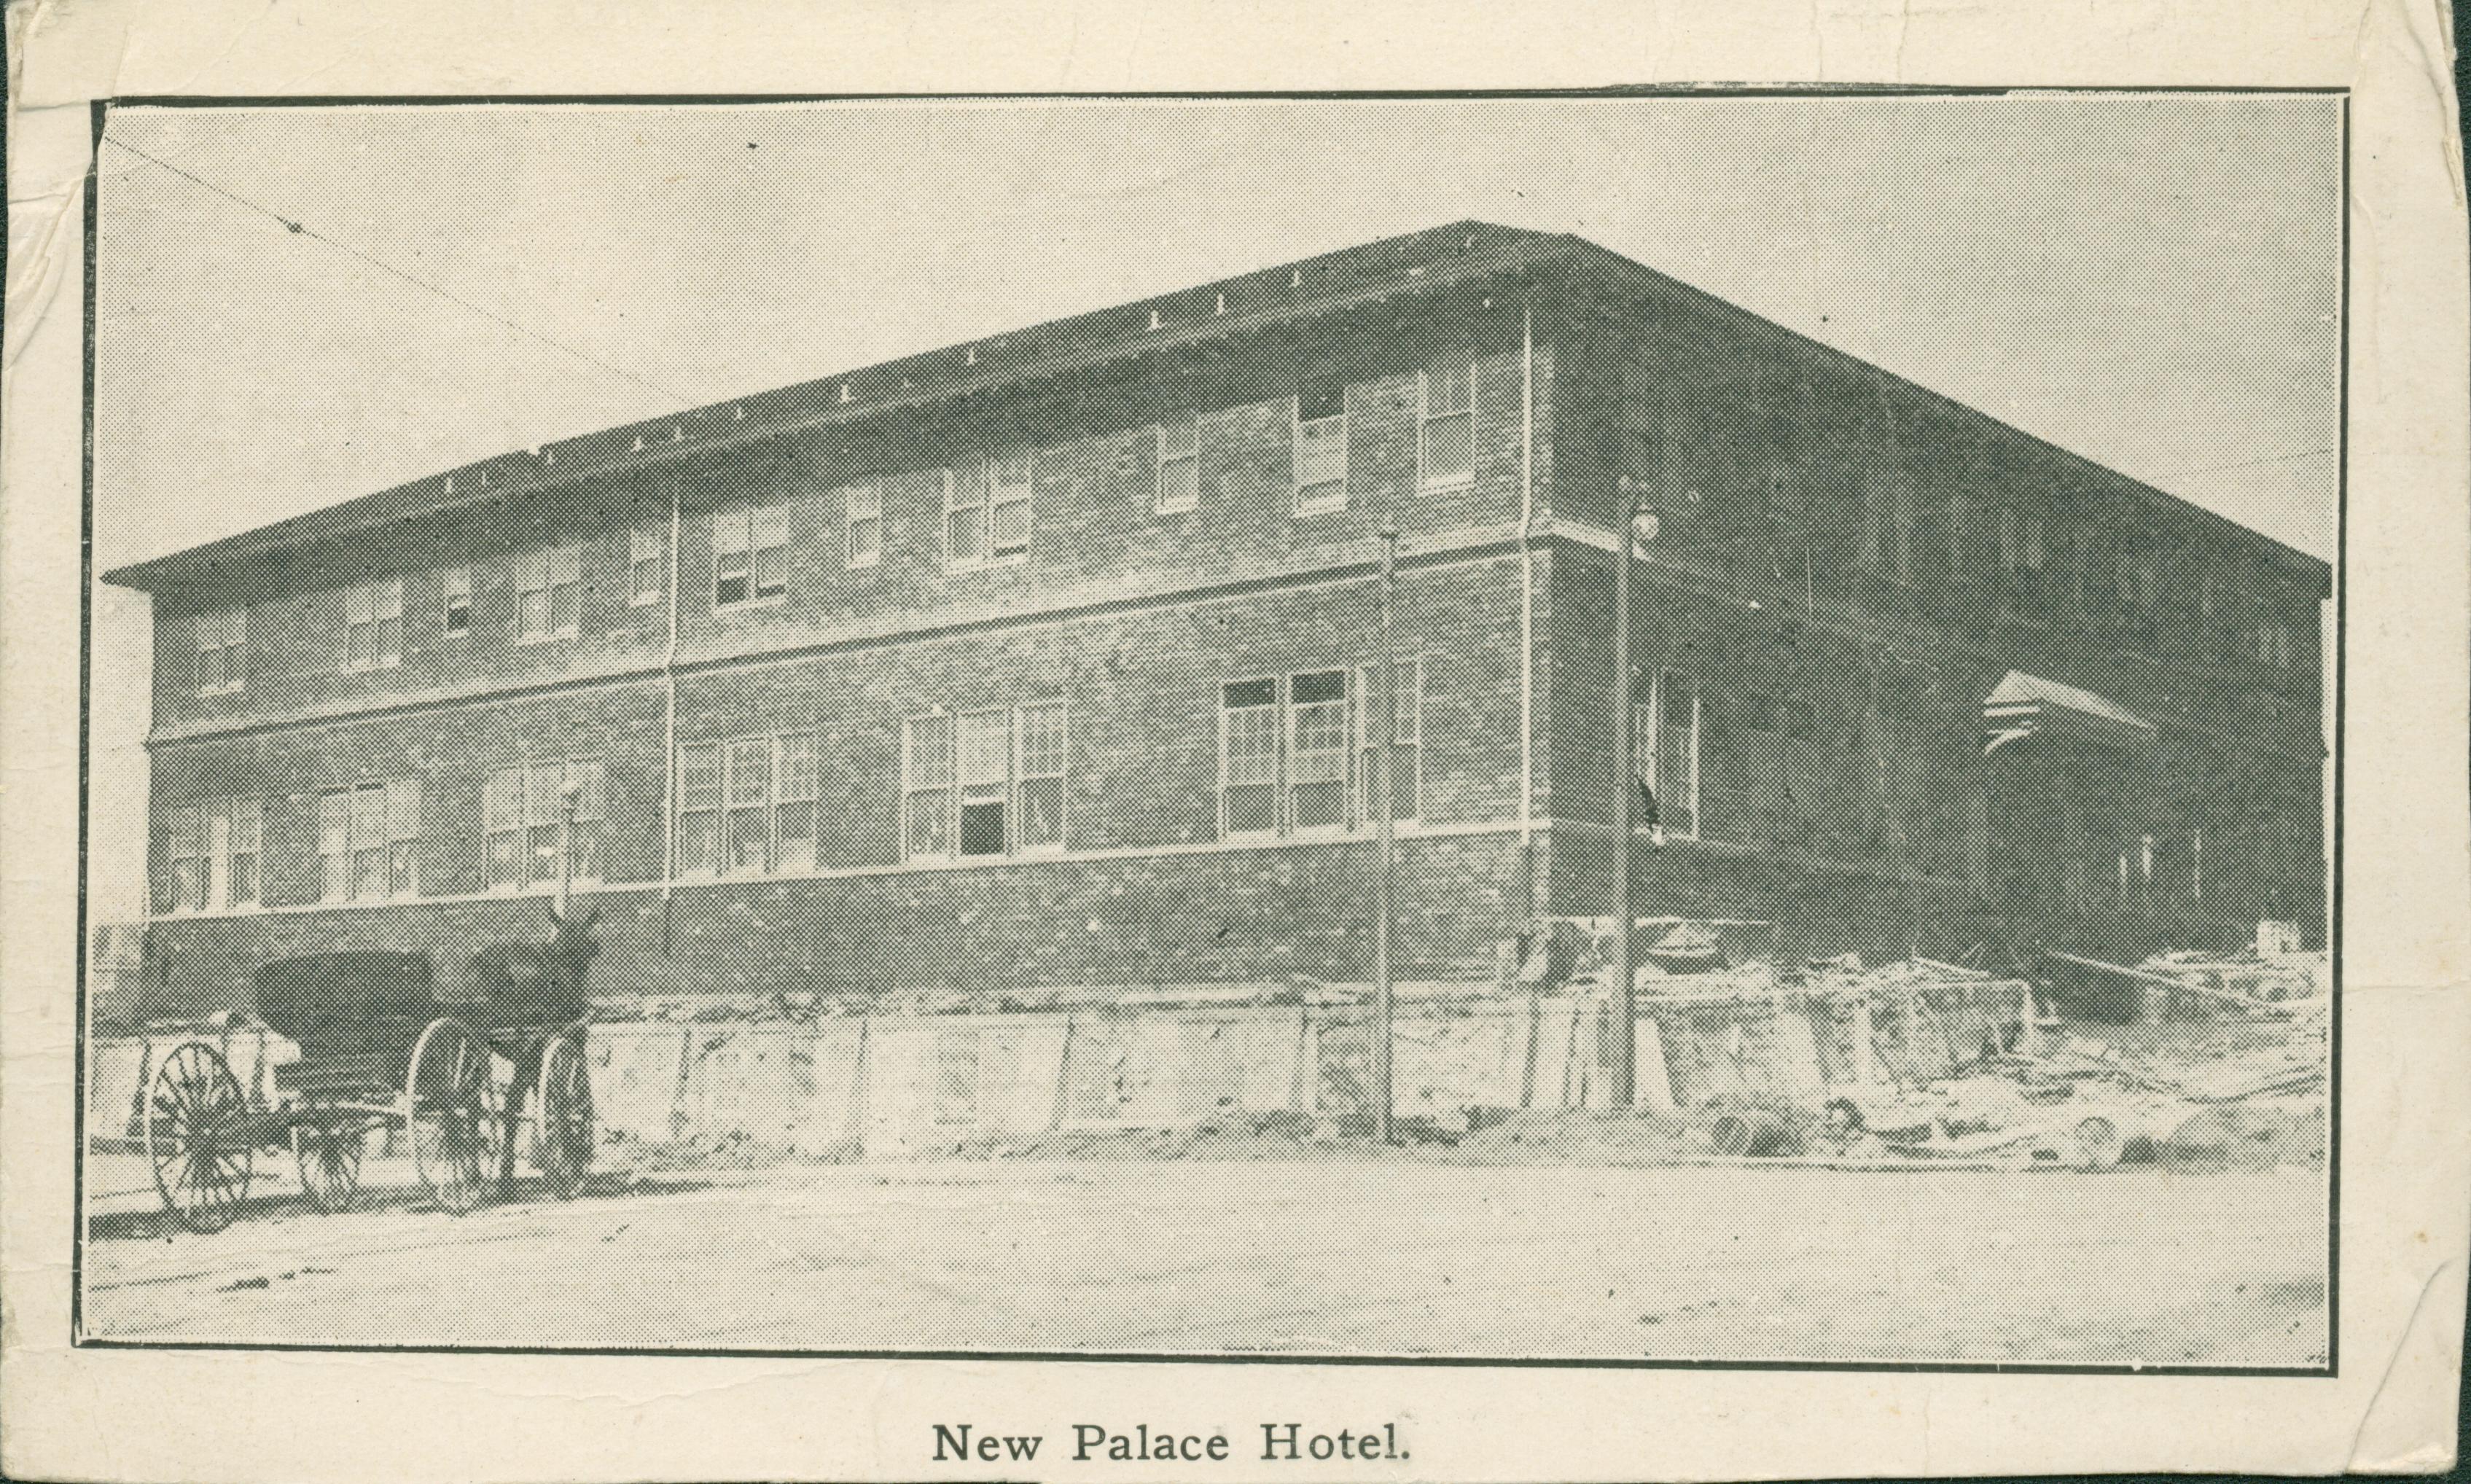 Photo of the New Palace Hotel.